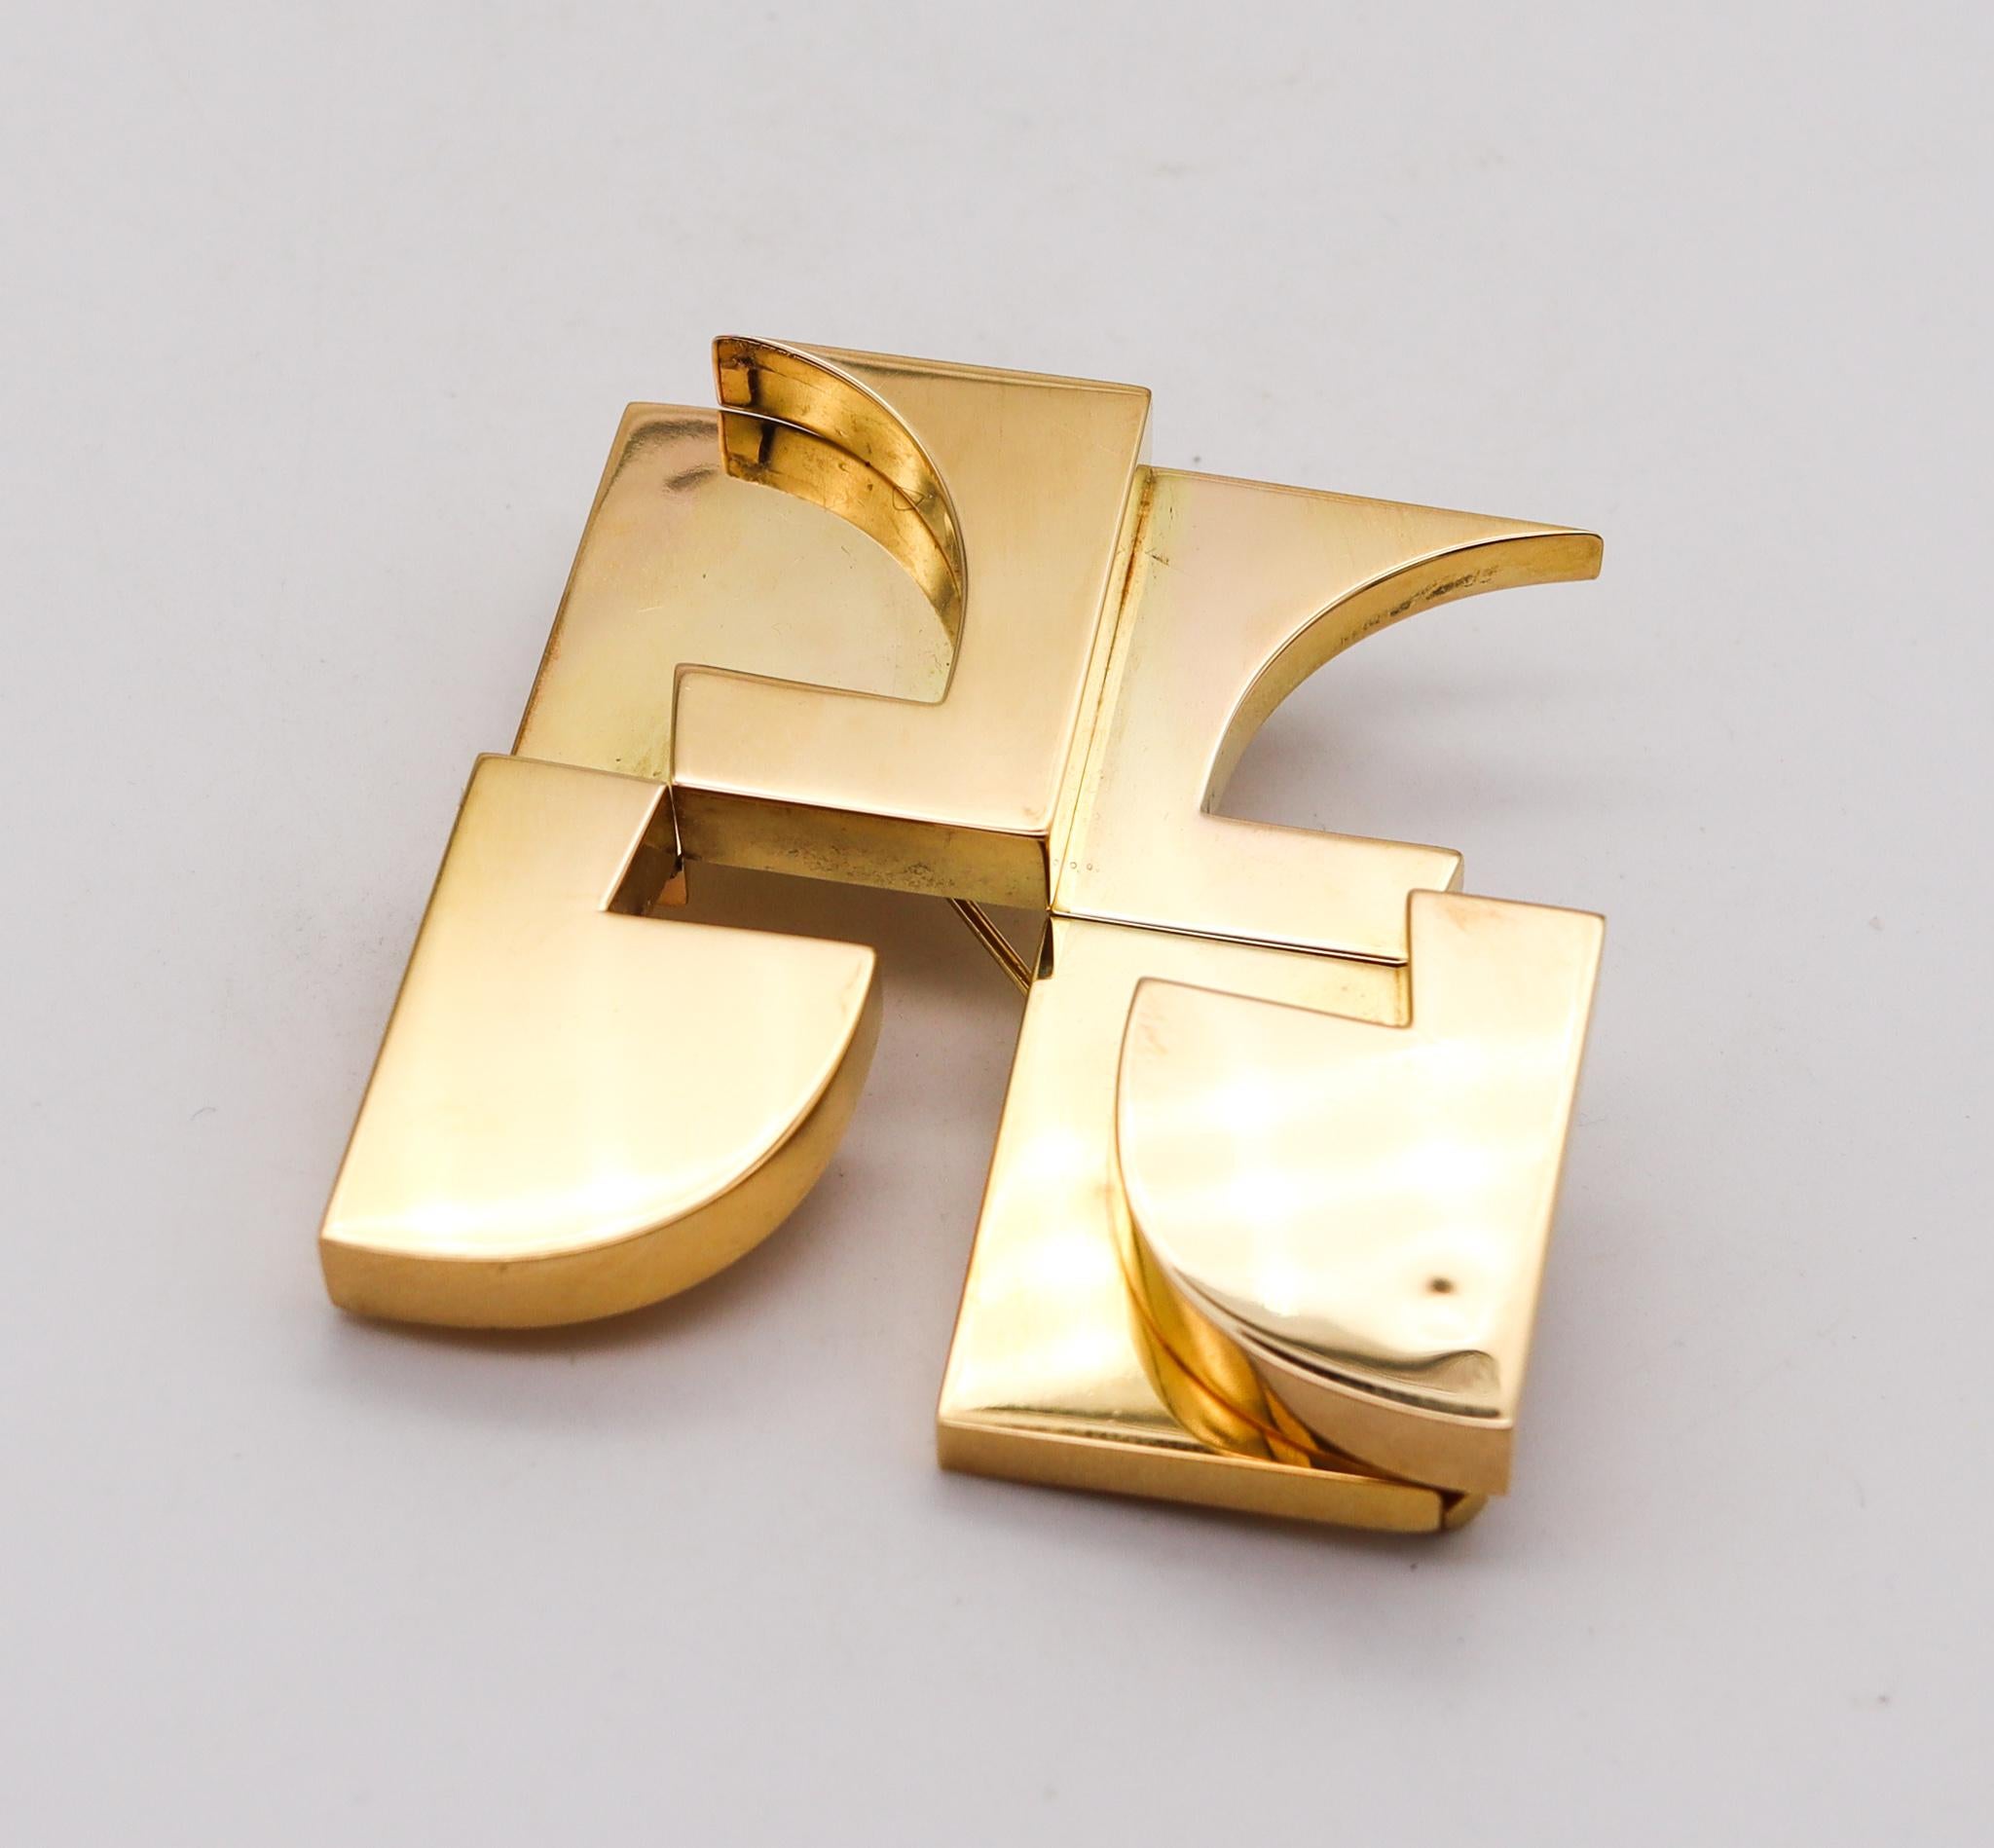 Hans Richter 1971 Sculptural Dadaism Geometric Pendant Brooch in 18t Yellow Gold In Excellent Condition For Sale In Miami, FL